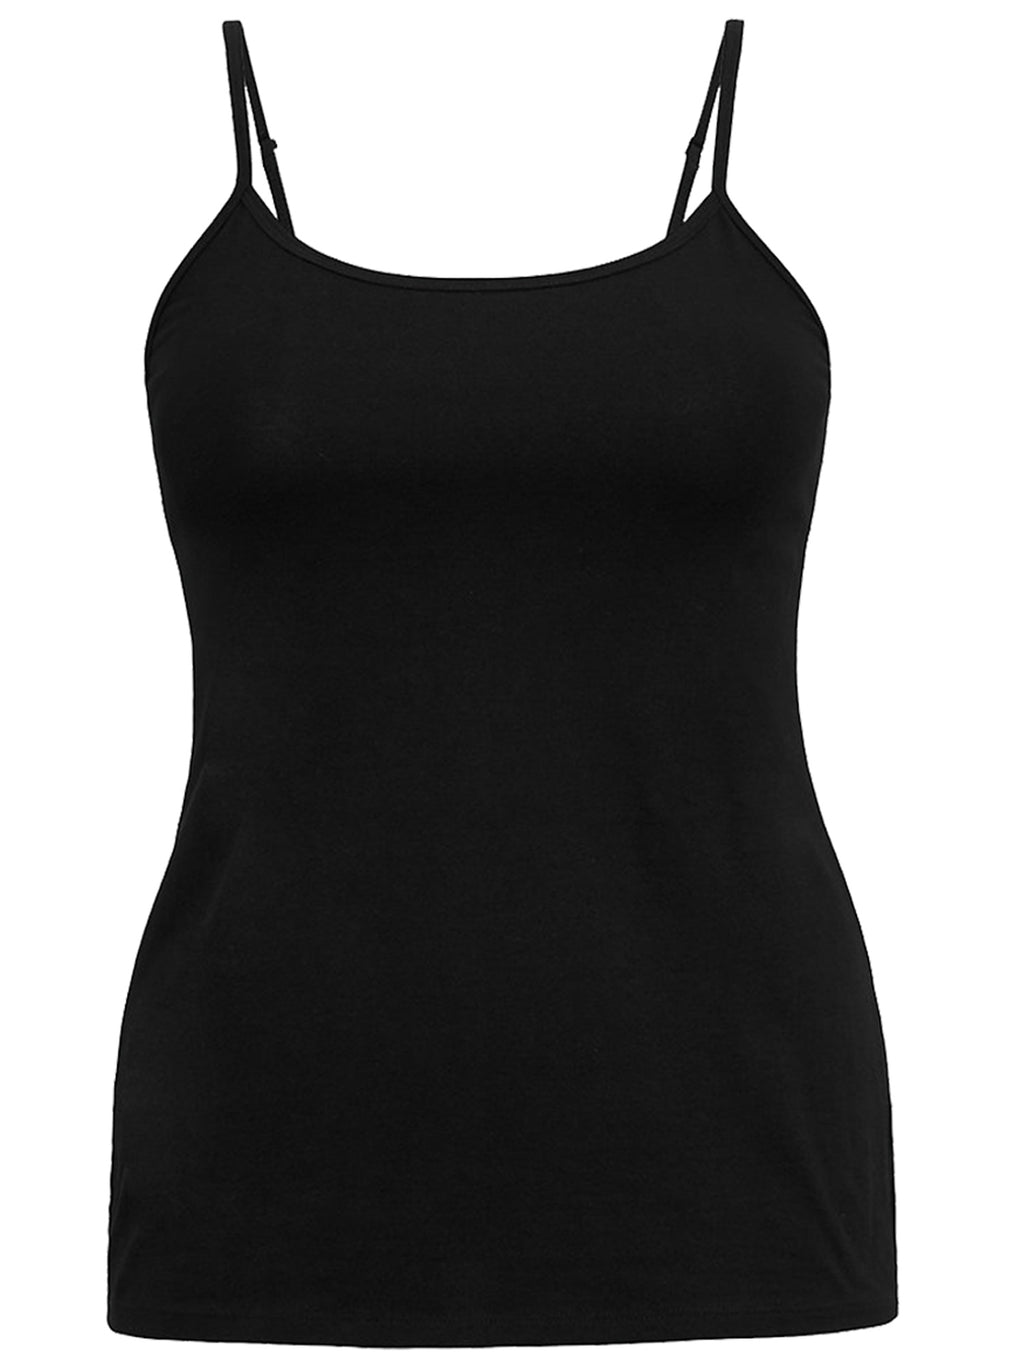 Plus Size Camisole With Adjustable Straps